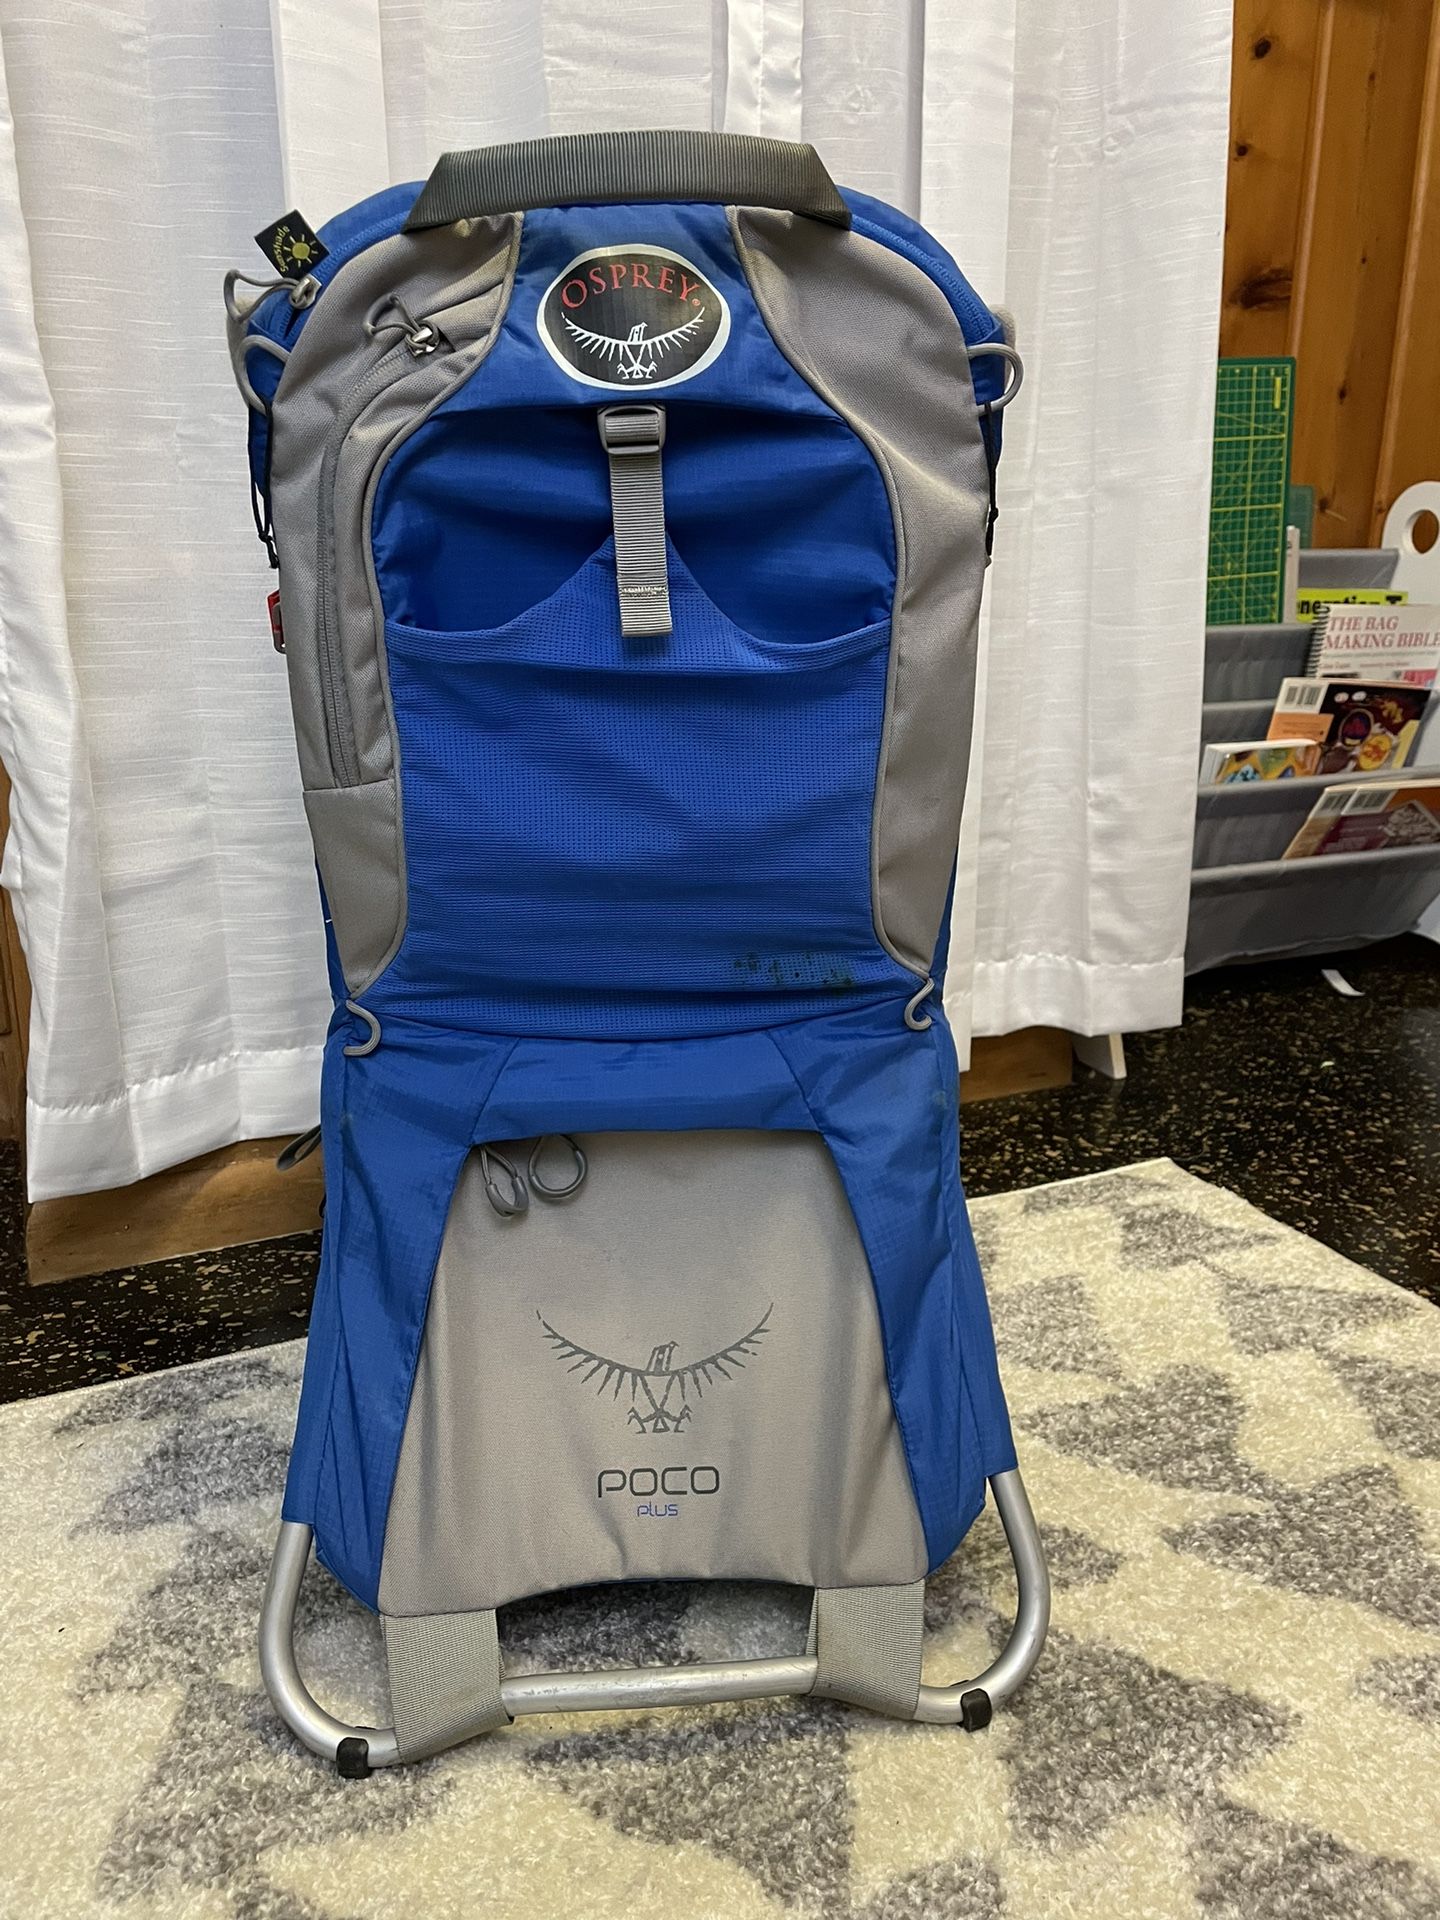 (PENDING PICK UP) Osprey Poco Plus Child Carrier For Hiking